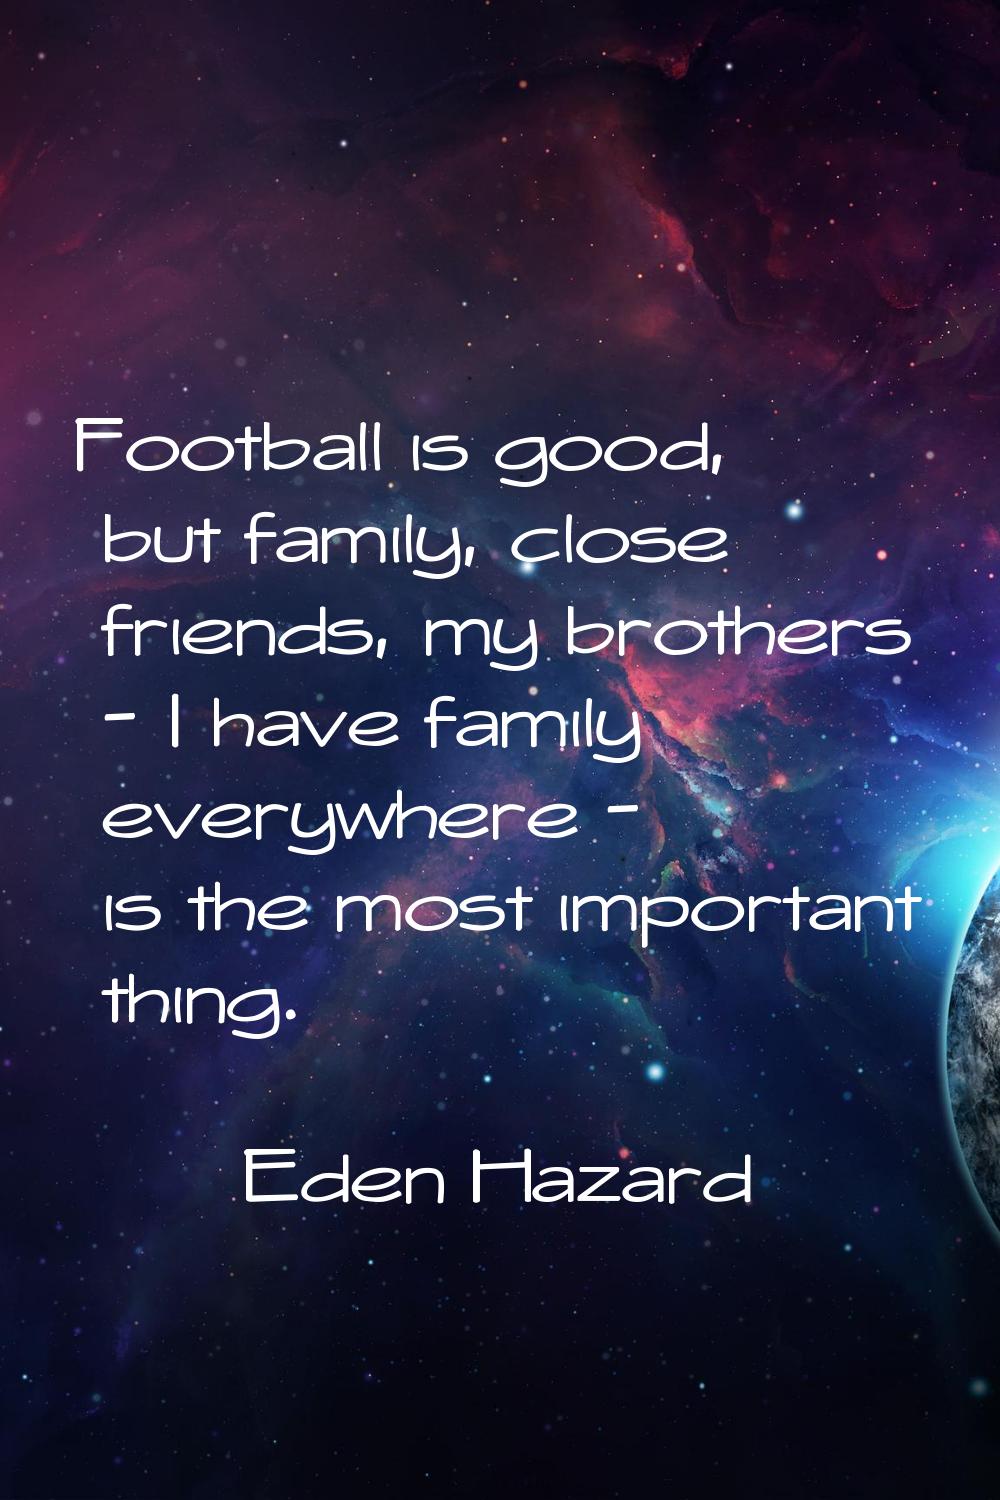 Football is good, but family, close friends, my brothers - I have family everywhere - is the most i